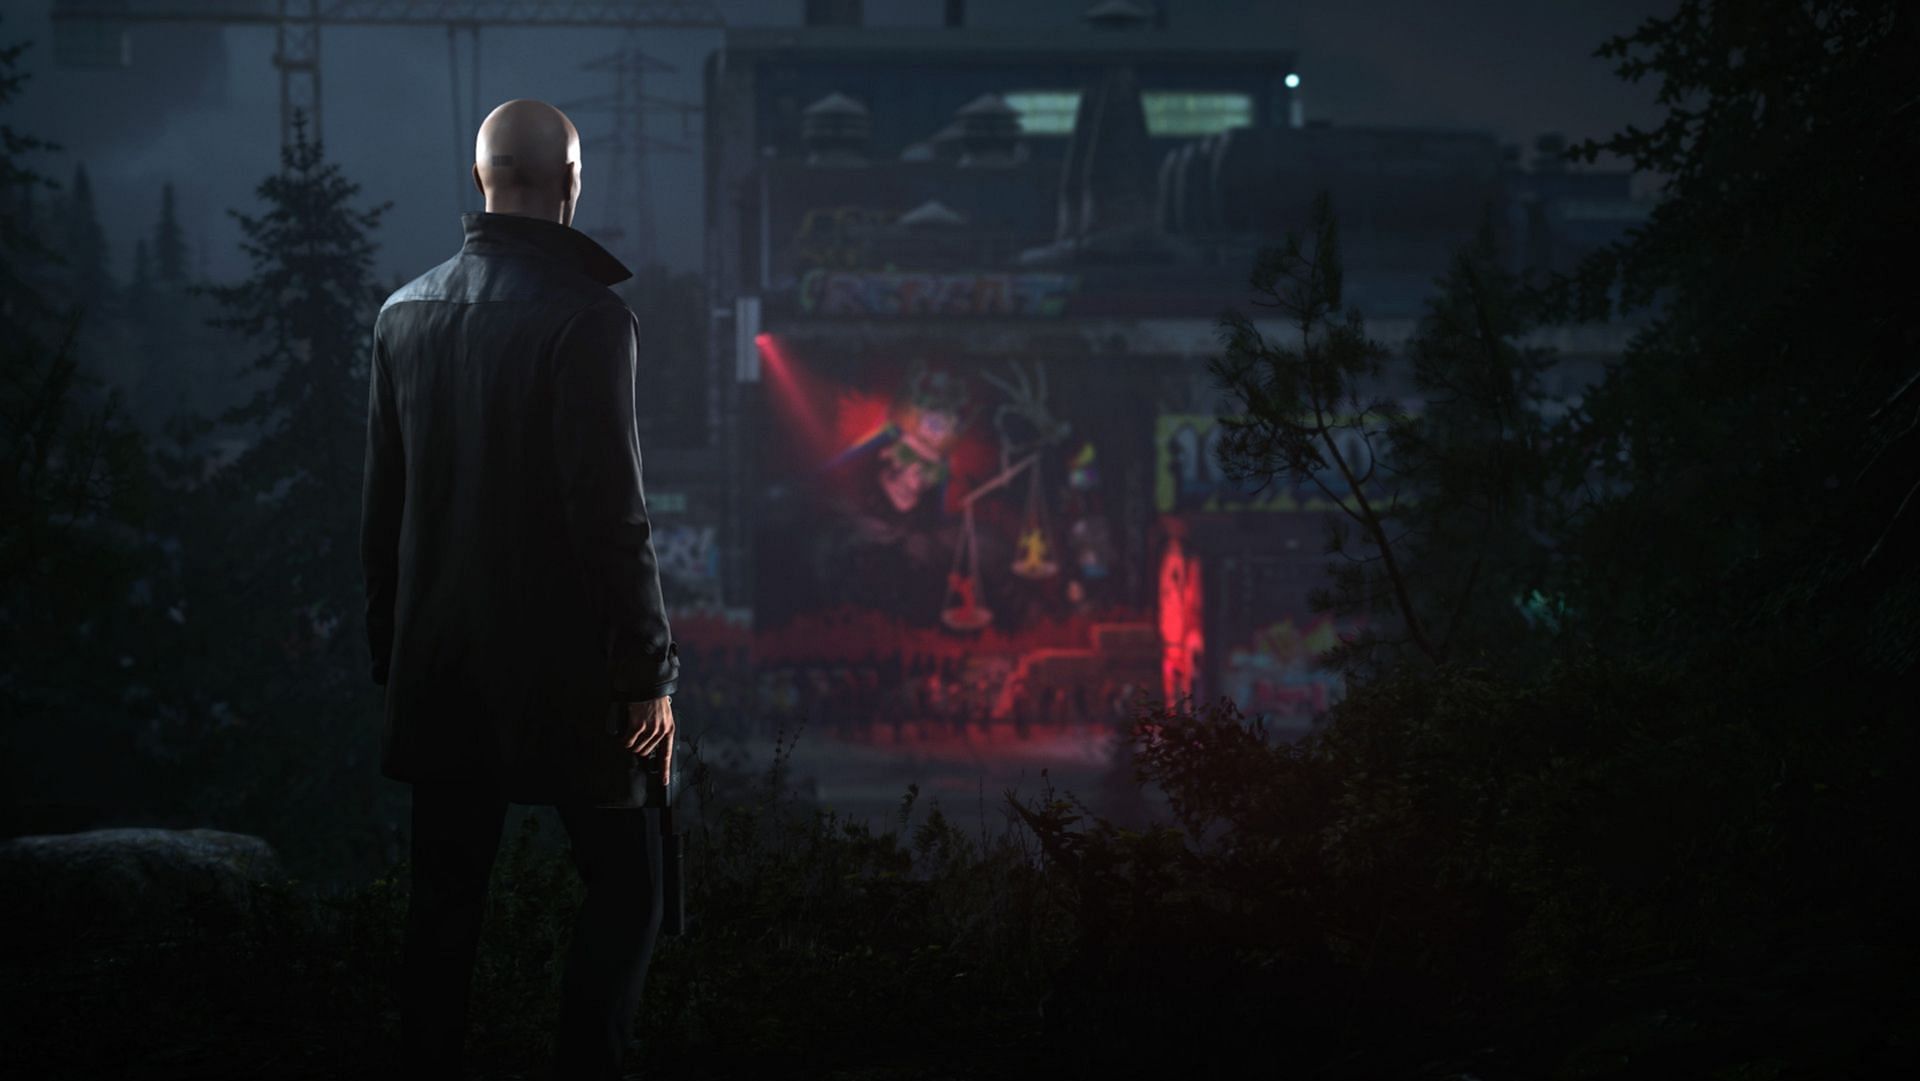 Hitman 3 review: a brilliant, thrilling conclusion to Agent 47's